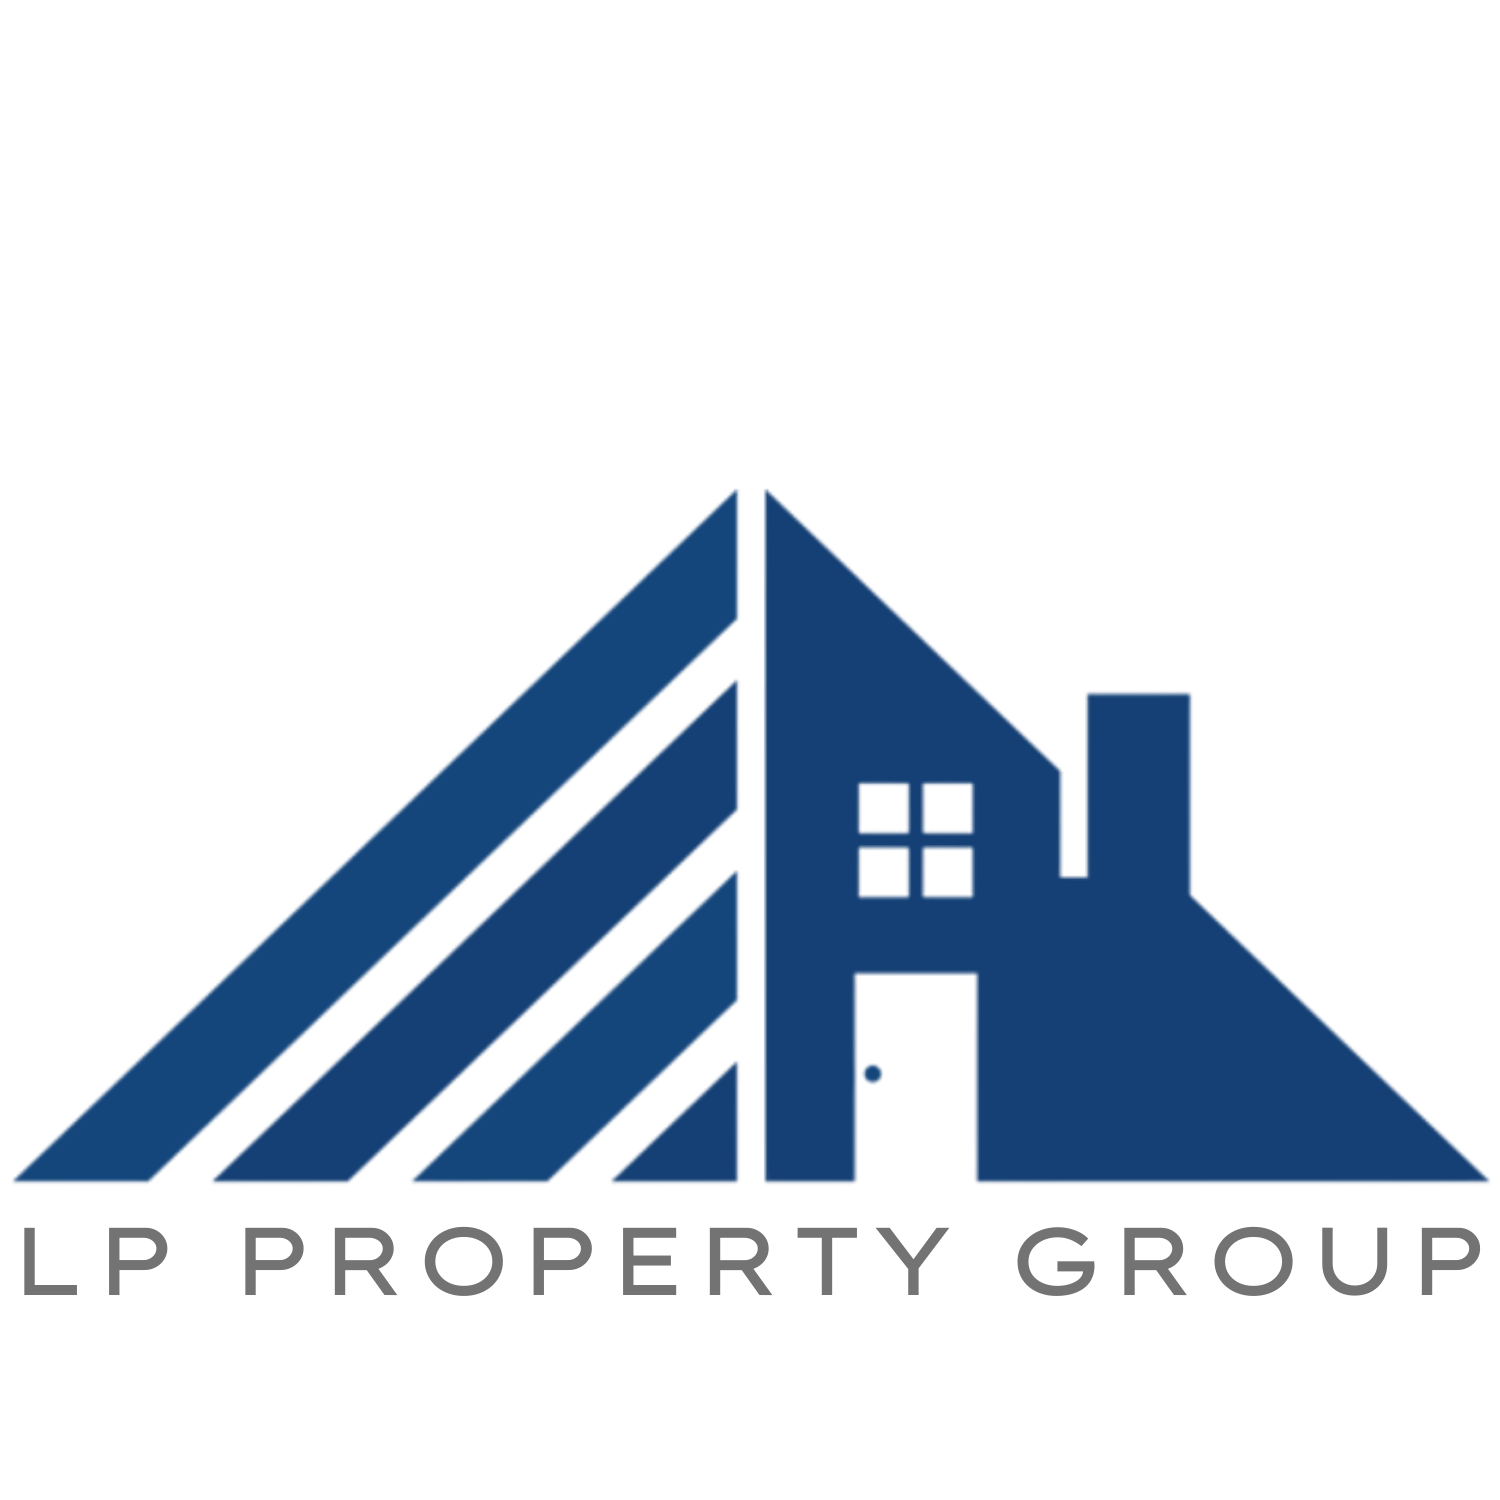 We Buy Real Estate for Cash in Cuyahoga, Summit, Portage, and Lake Counties | LP Property Group